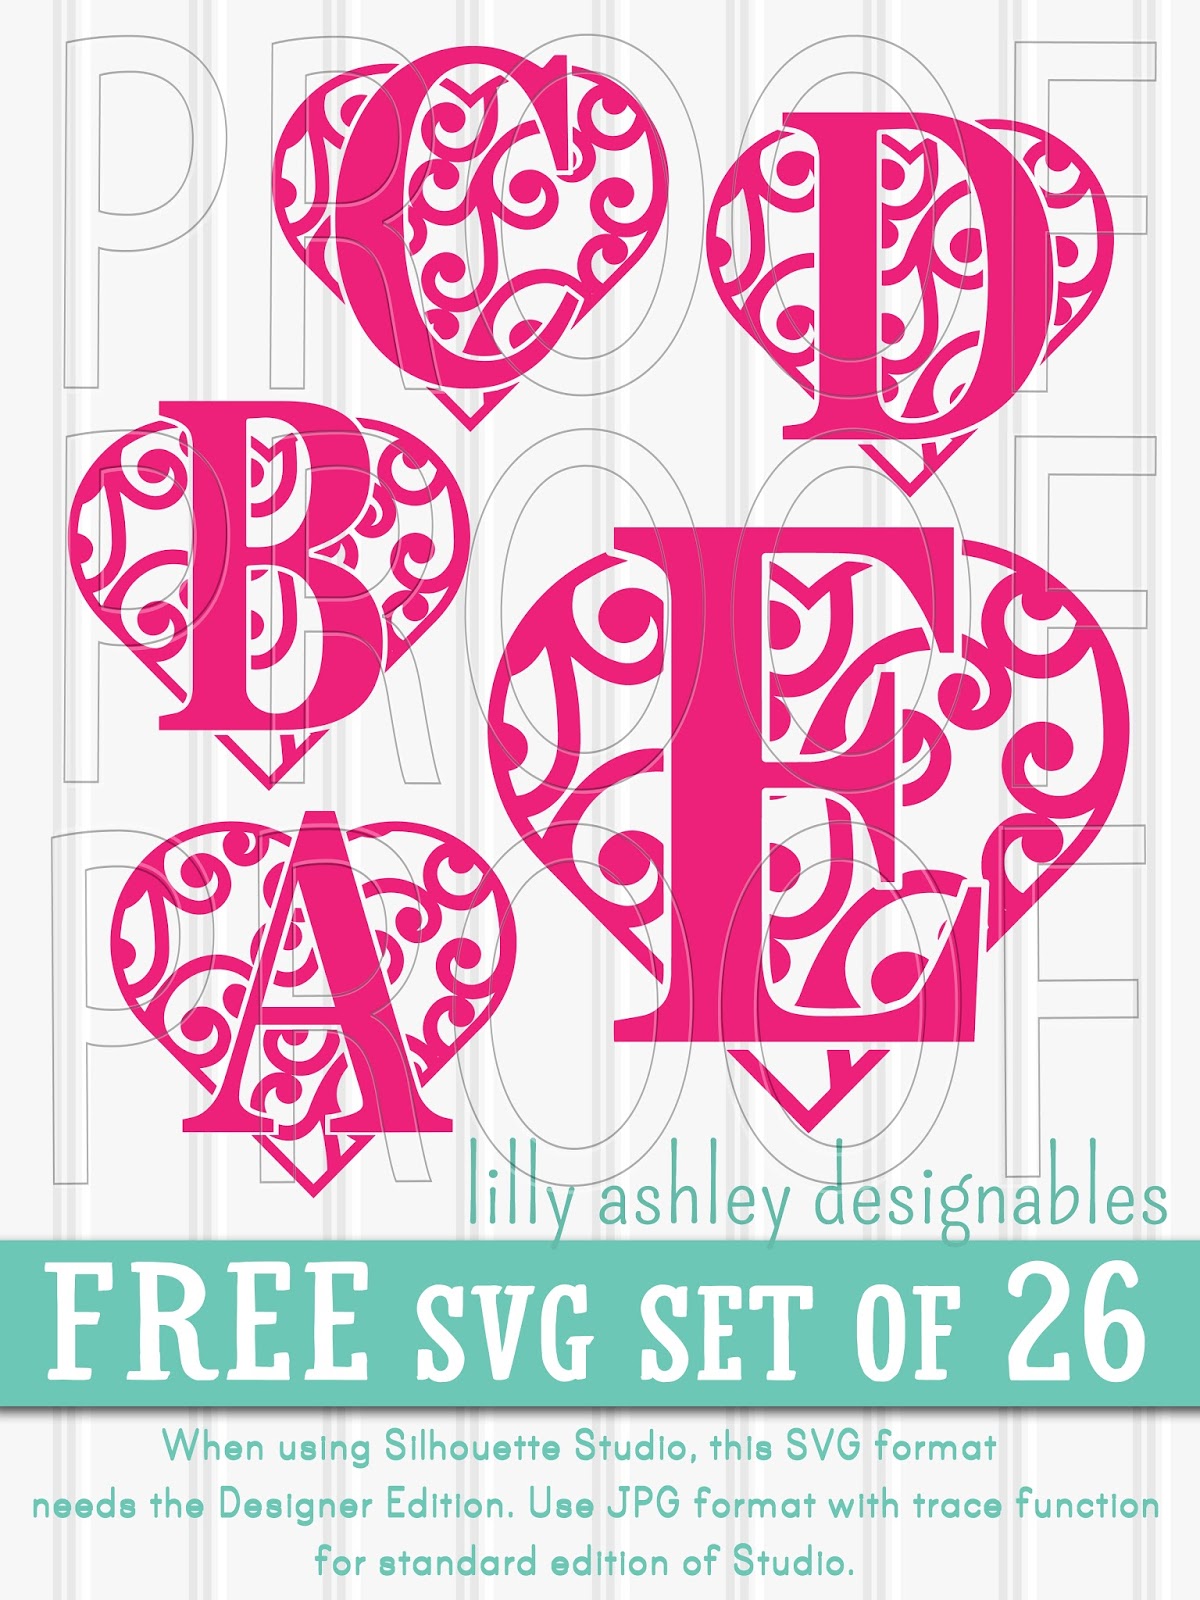 Download Make it Create by LillyAshley...Freebie Downloads: Free SVG File Set of Letters